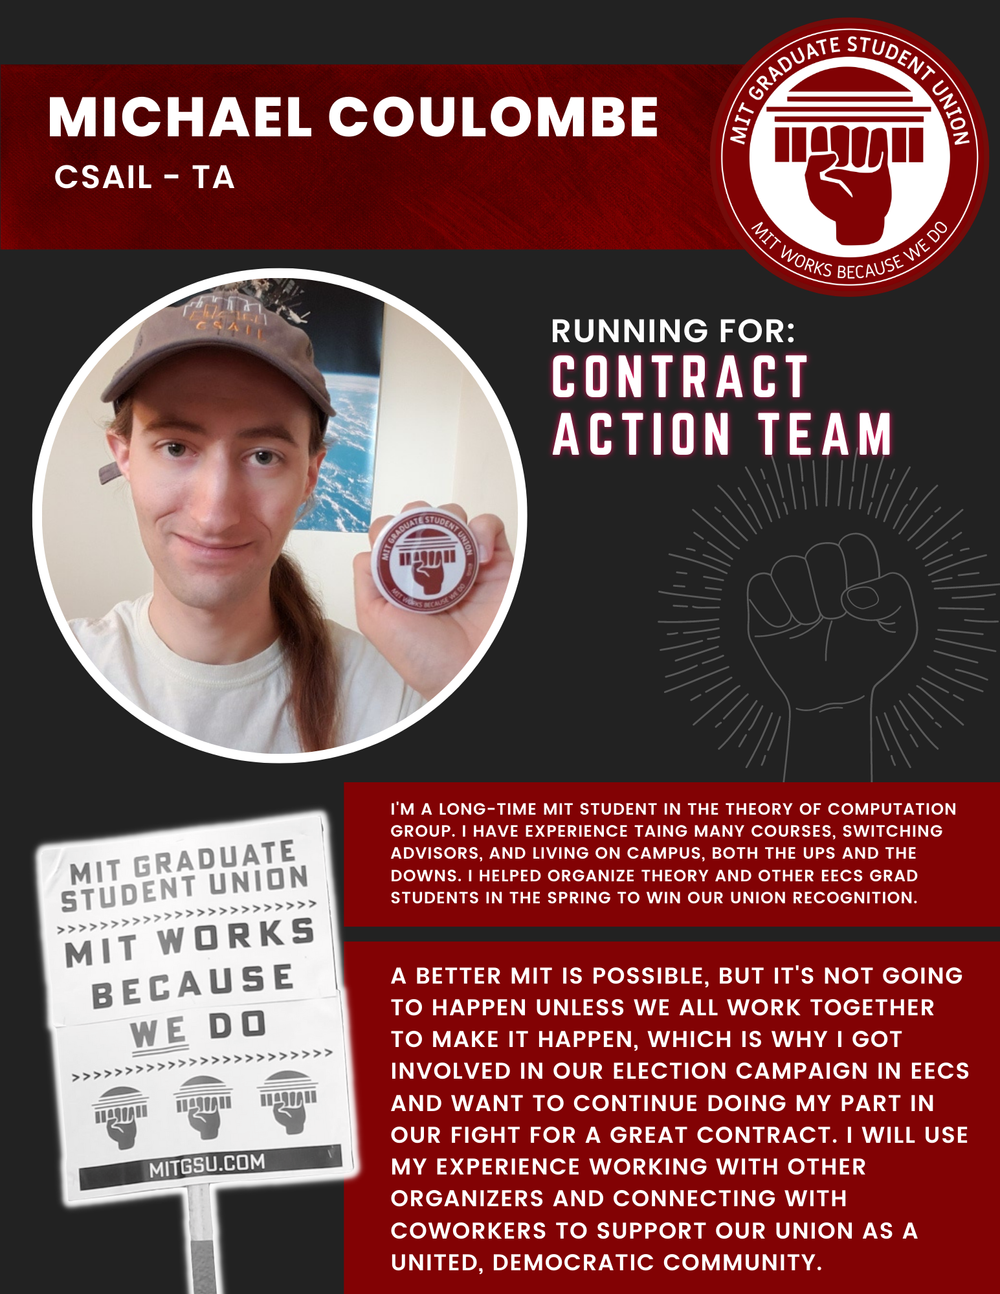  MICHAEL COULOMBE CSAIL - TA   RUNNING FOR: Contract Action Team  I'M A LONG-TIME MIT STUDENT IN THE THEORY OF COMPUTATION GROUP. I HAVE EXPERIENCE TAING MANY COURSES, SWITCHING ADVISORS, AND LIVING ON CAMPUS, BOTH THE UPS AND THE DOWNS. I HELPED ORG